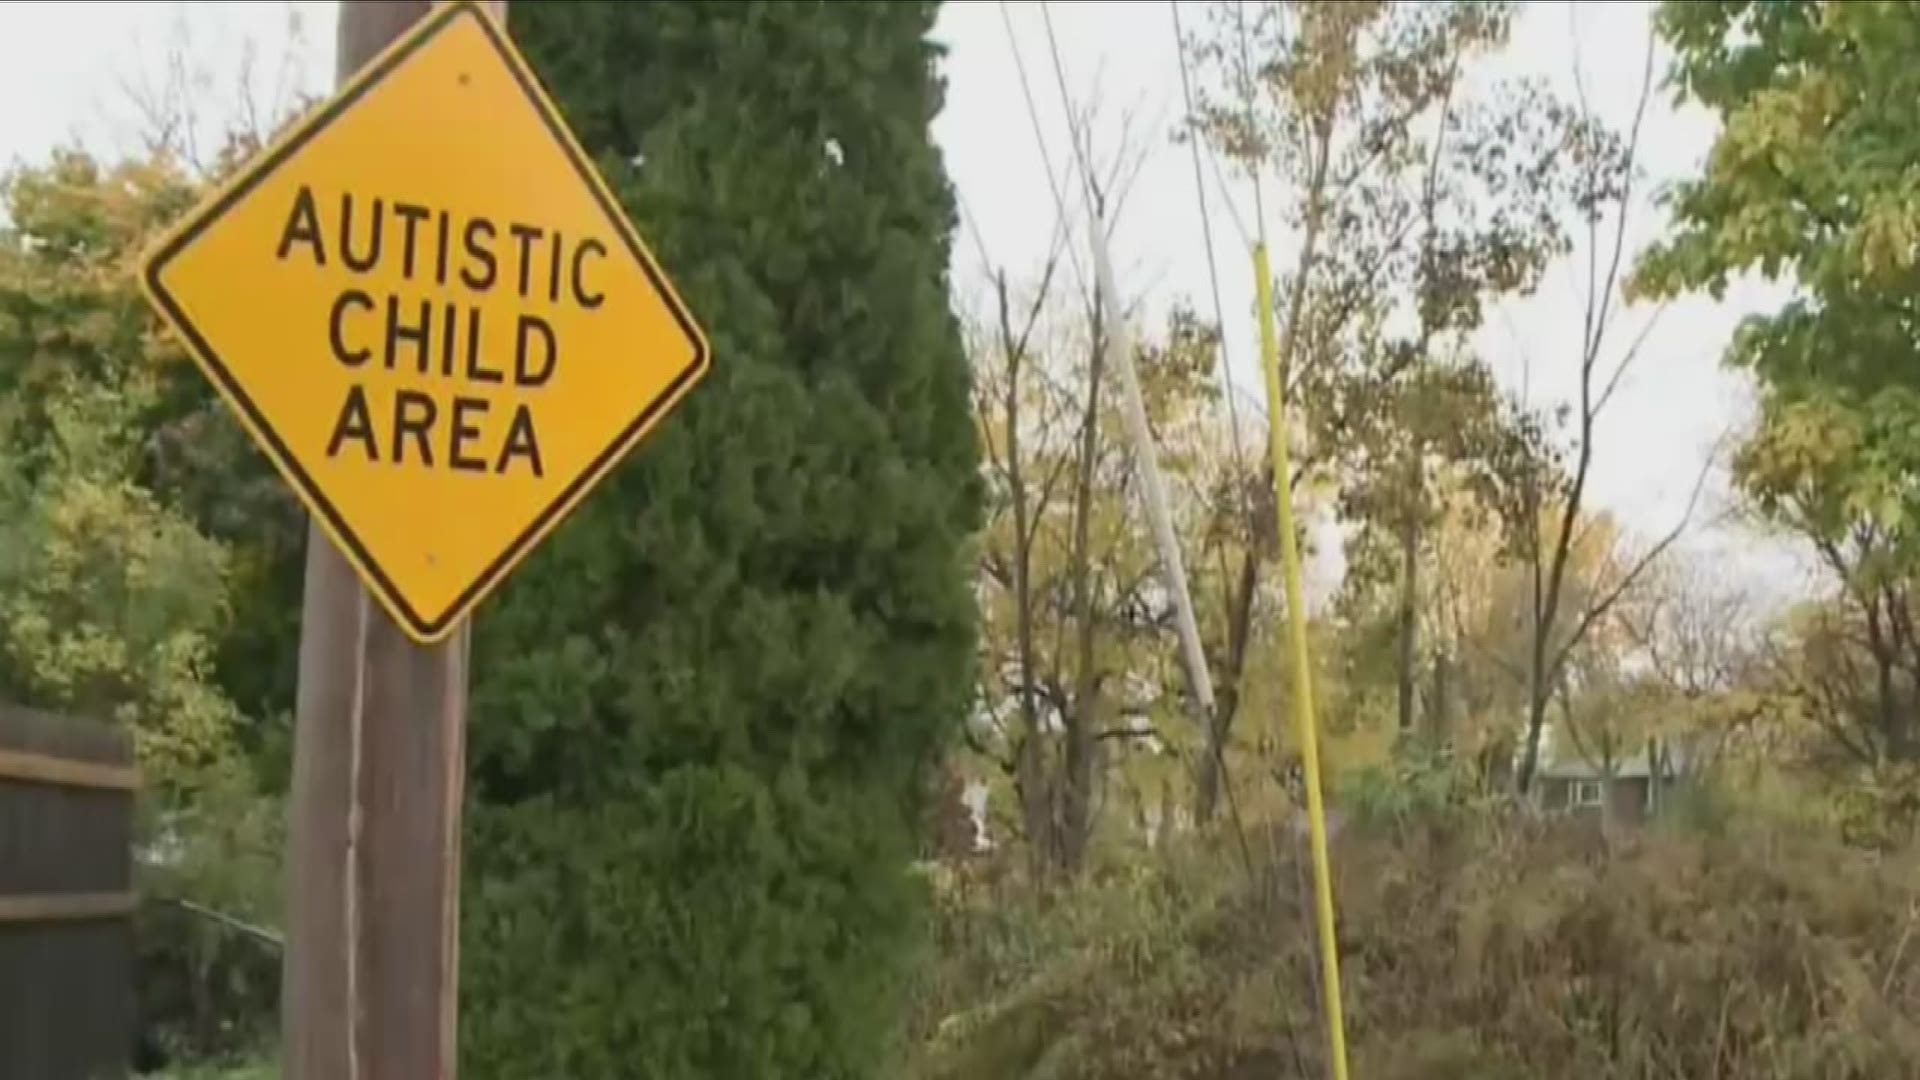 "Autistic Child Area" street signs approved